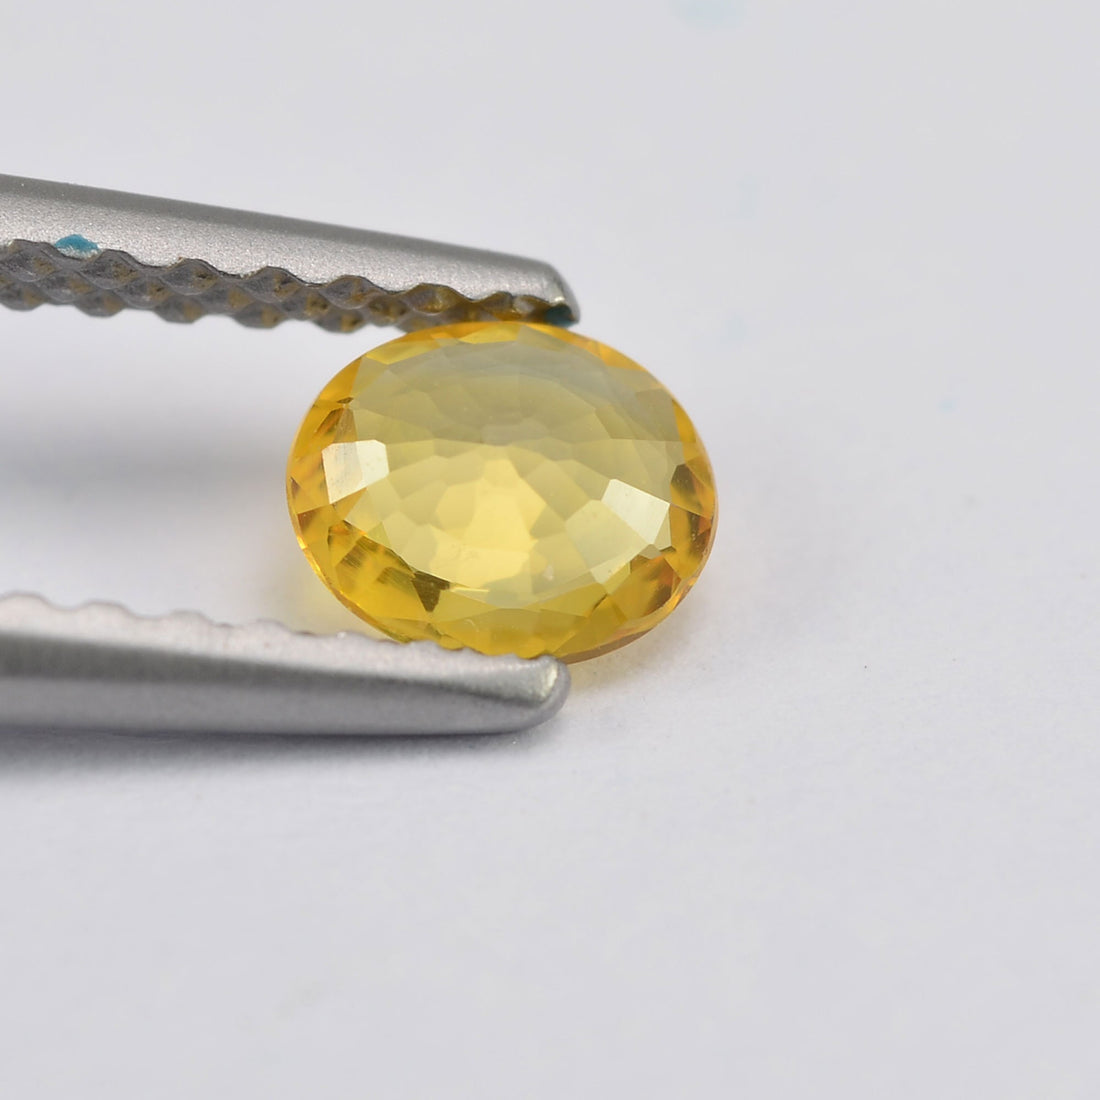 0.26 cts Natural Yellow Sapphire Loose Gemstone Oval Cut